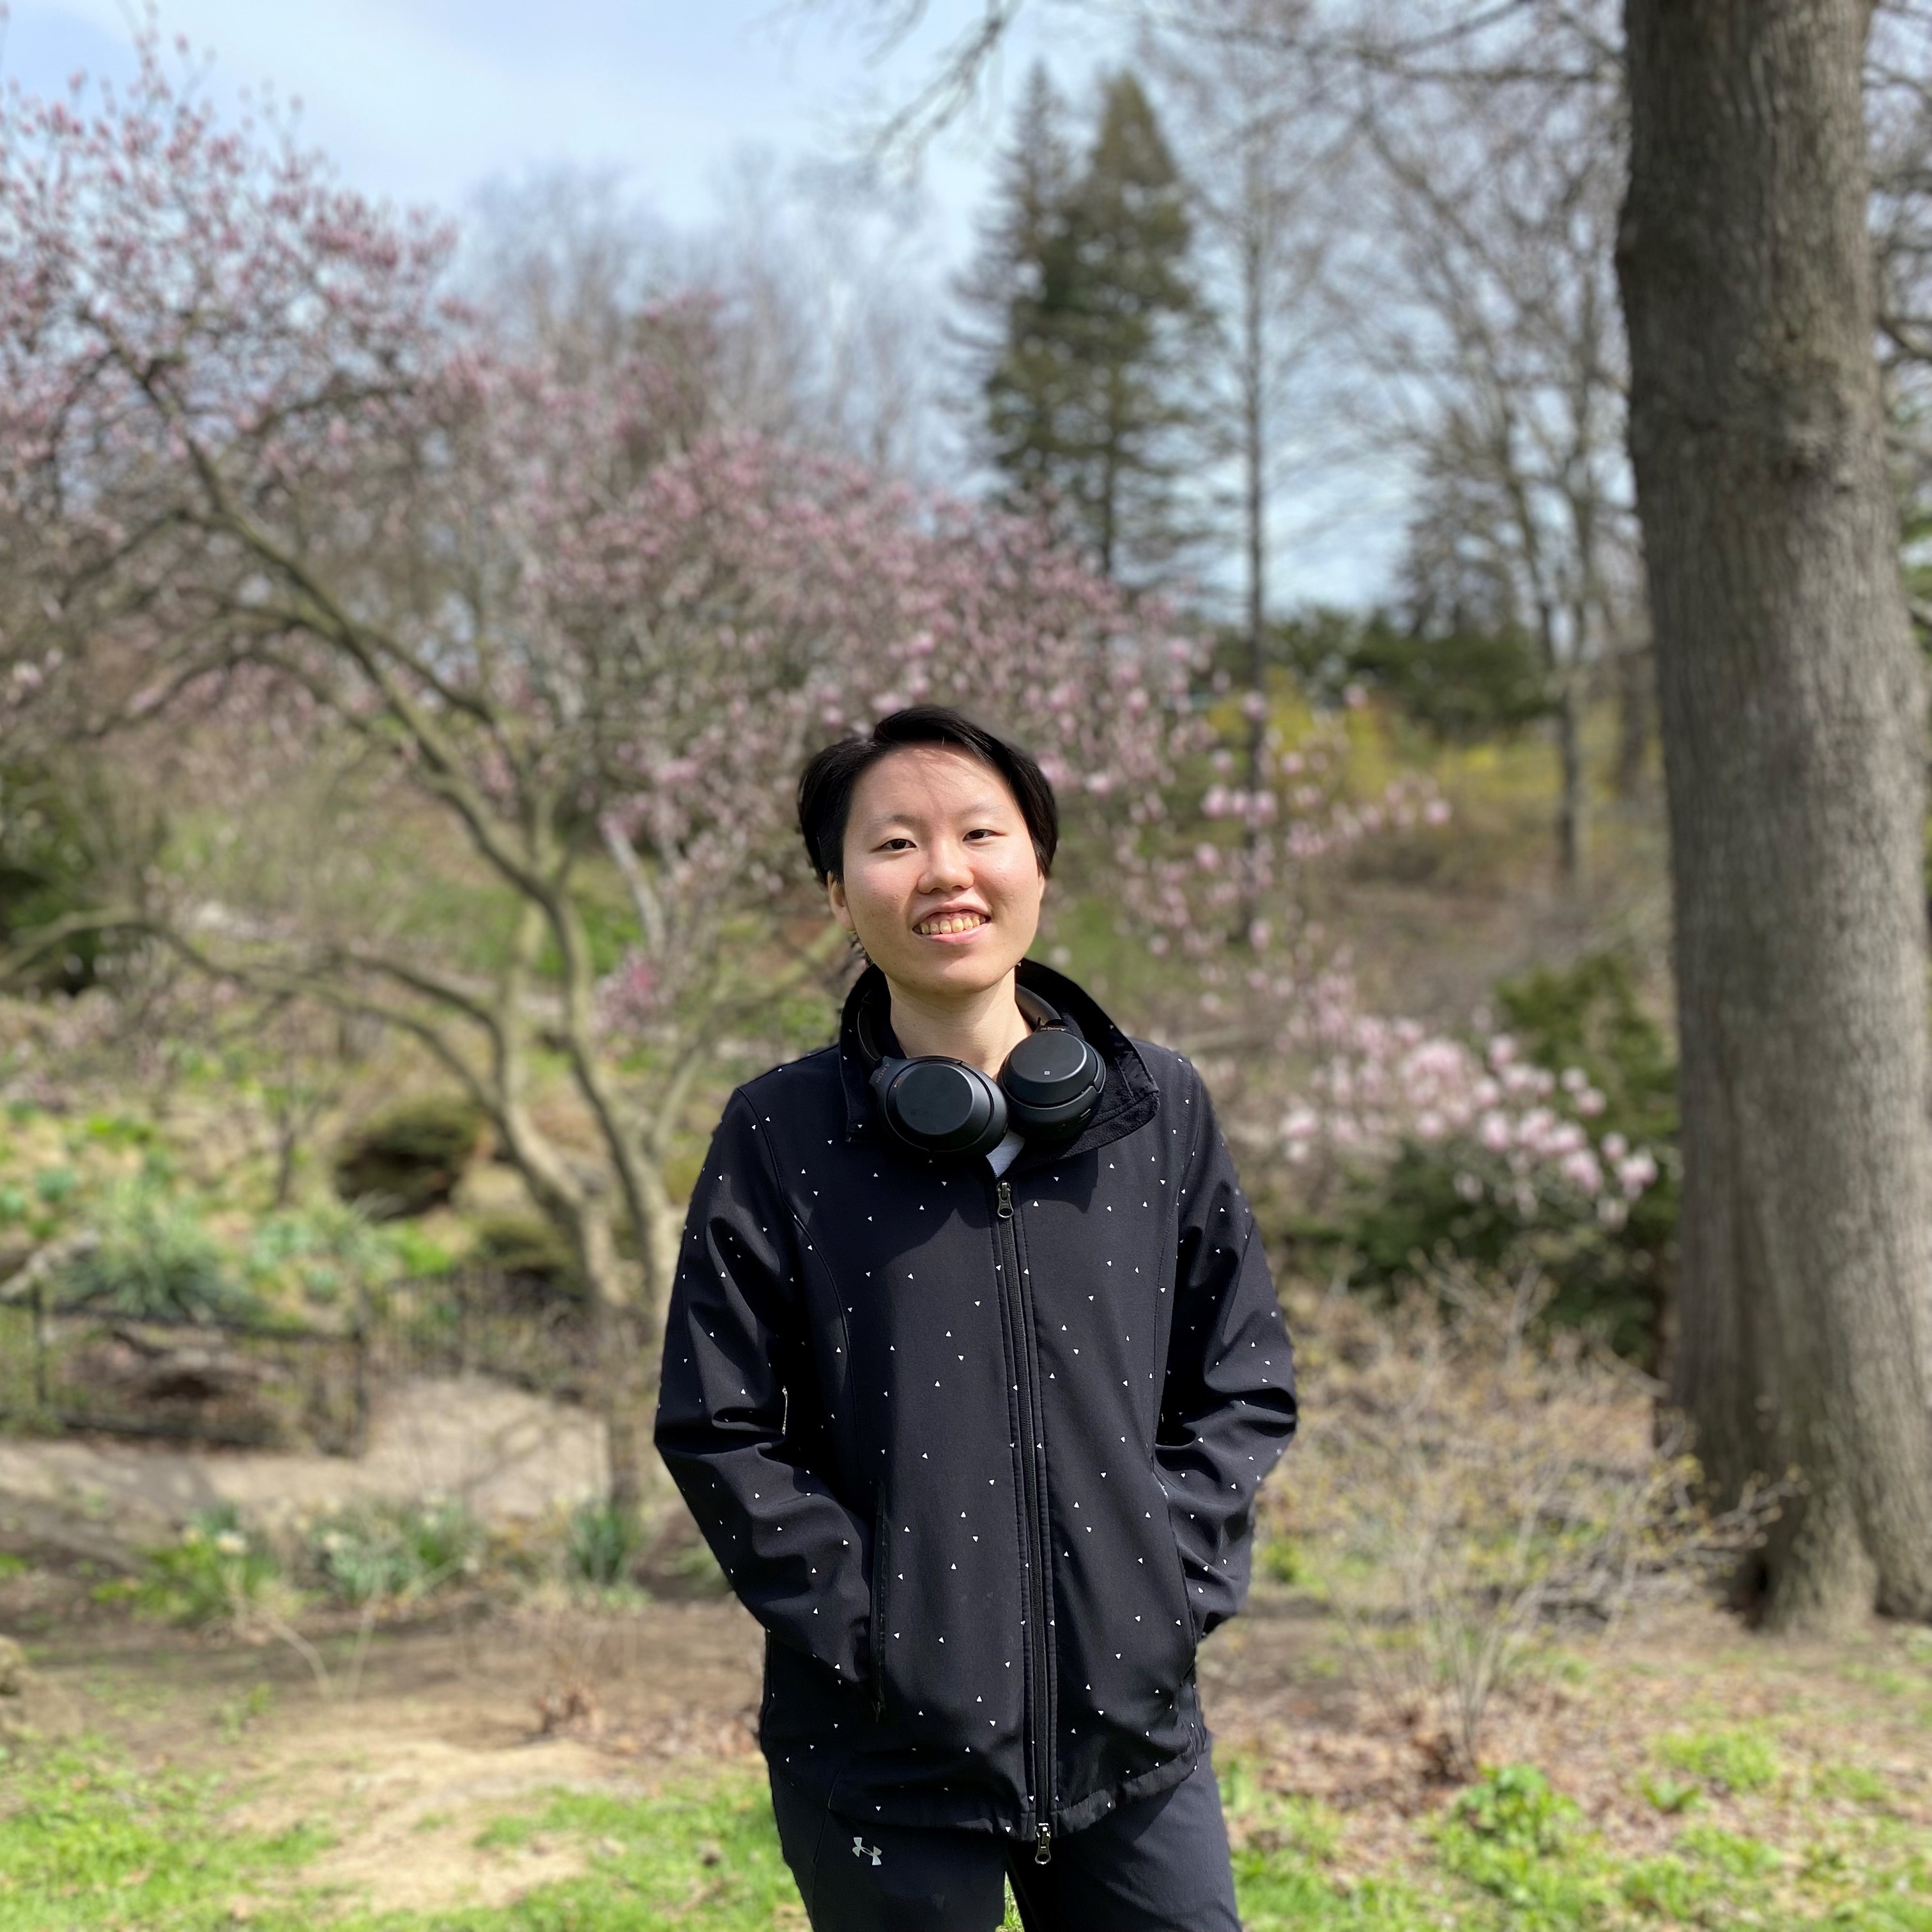 Shih Hua Lai, New College Life Science FLC peer mentor, stands outdoors in front of cherry blossom trees